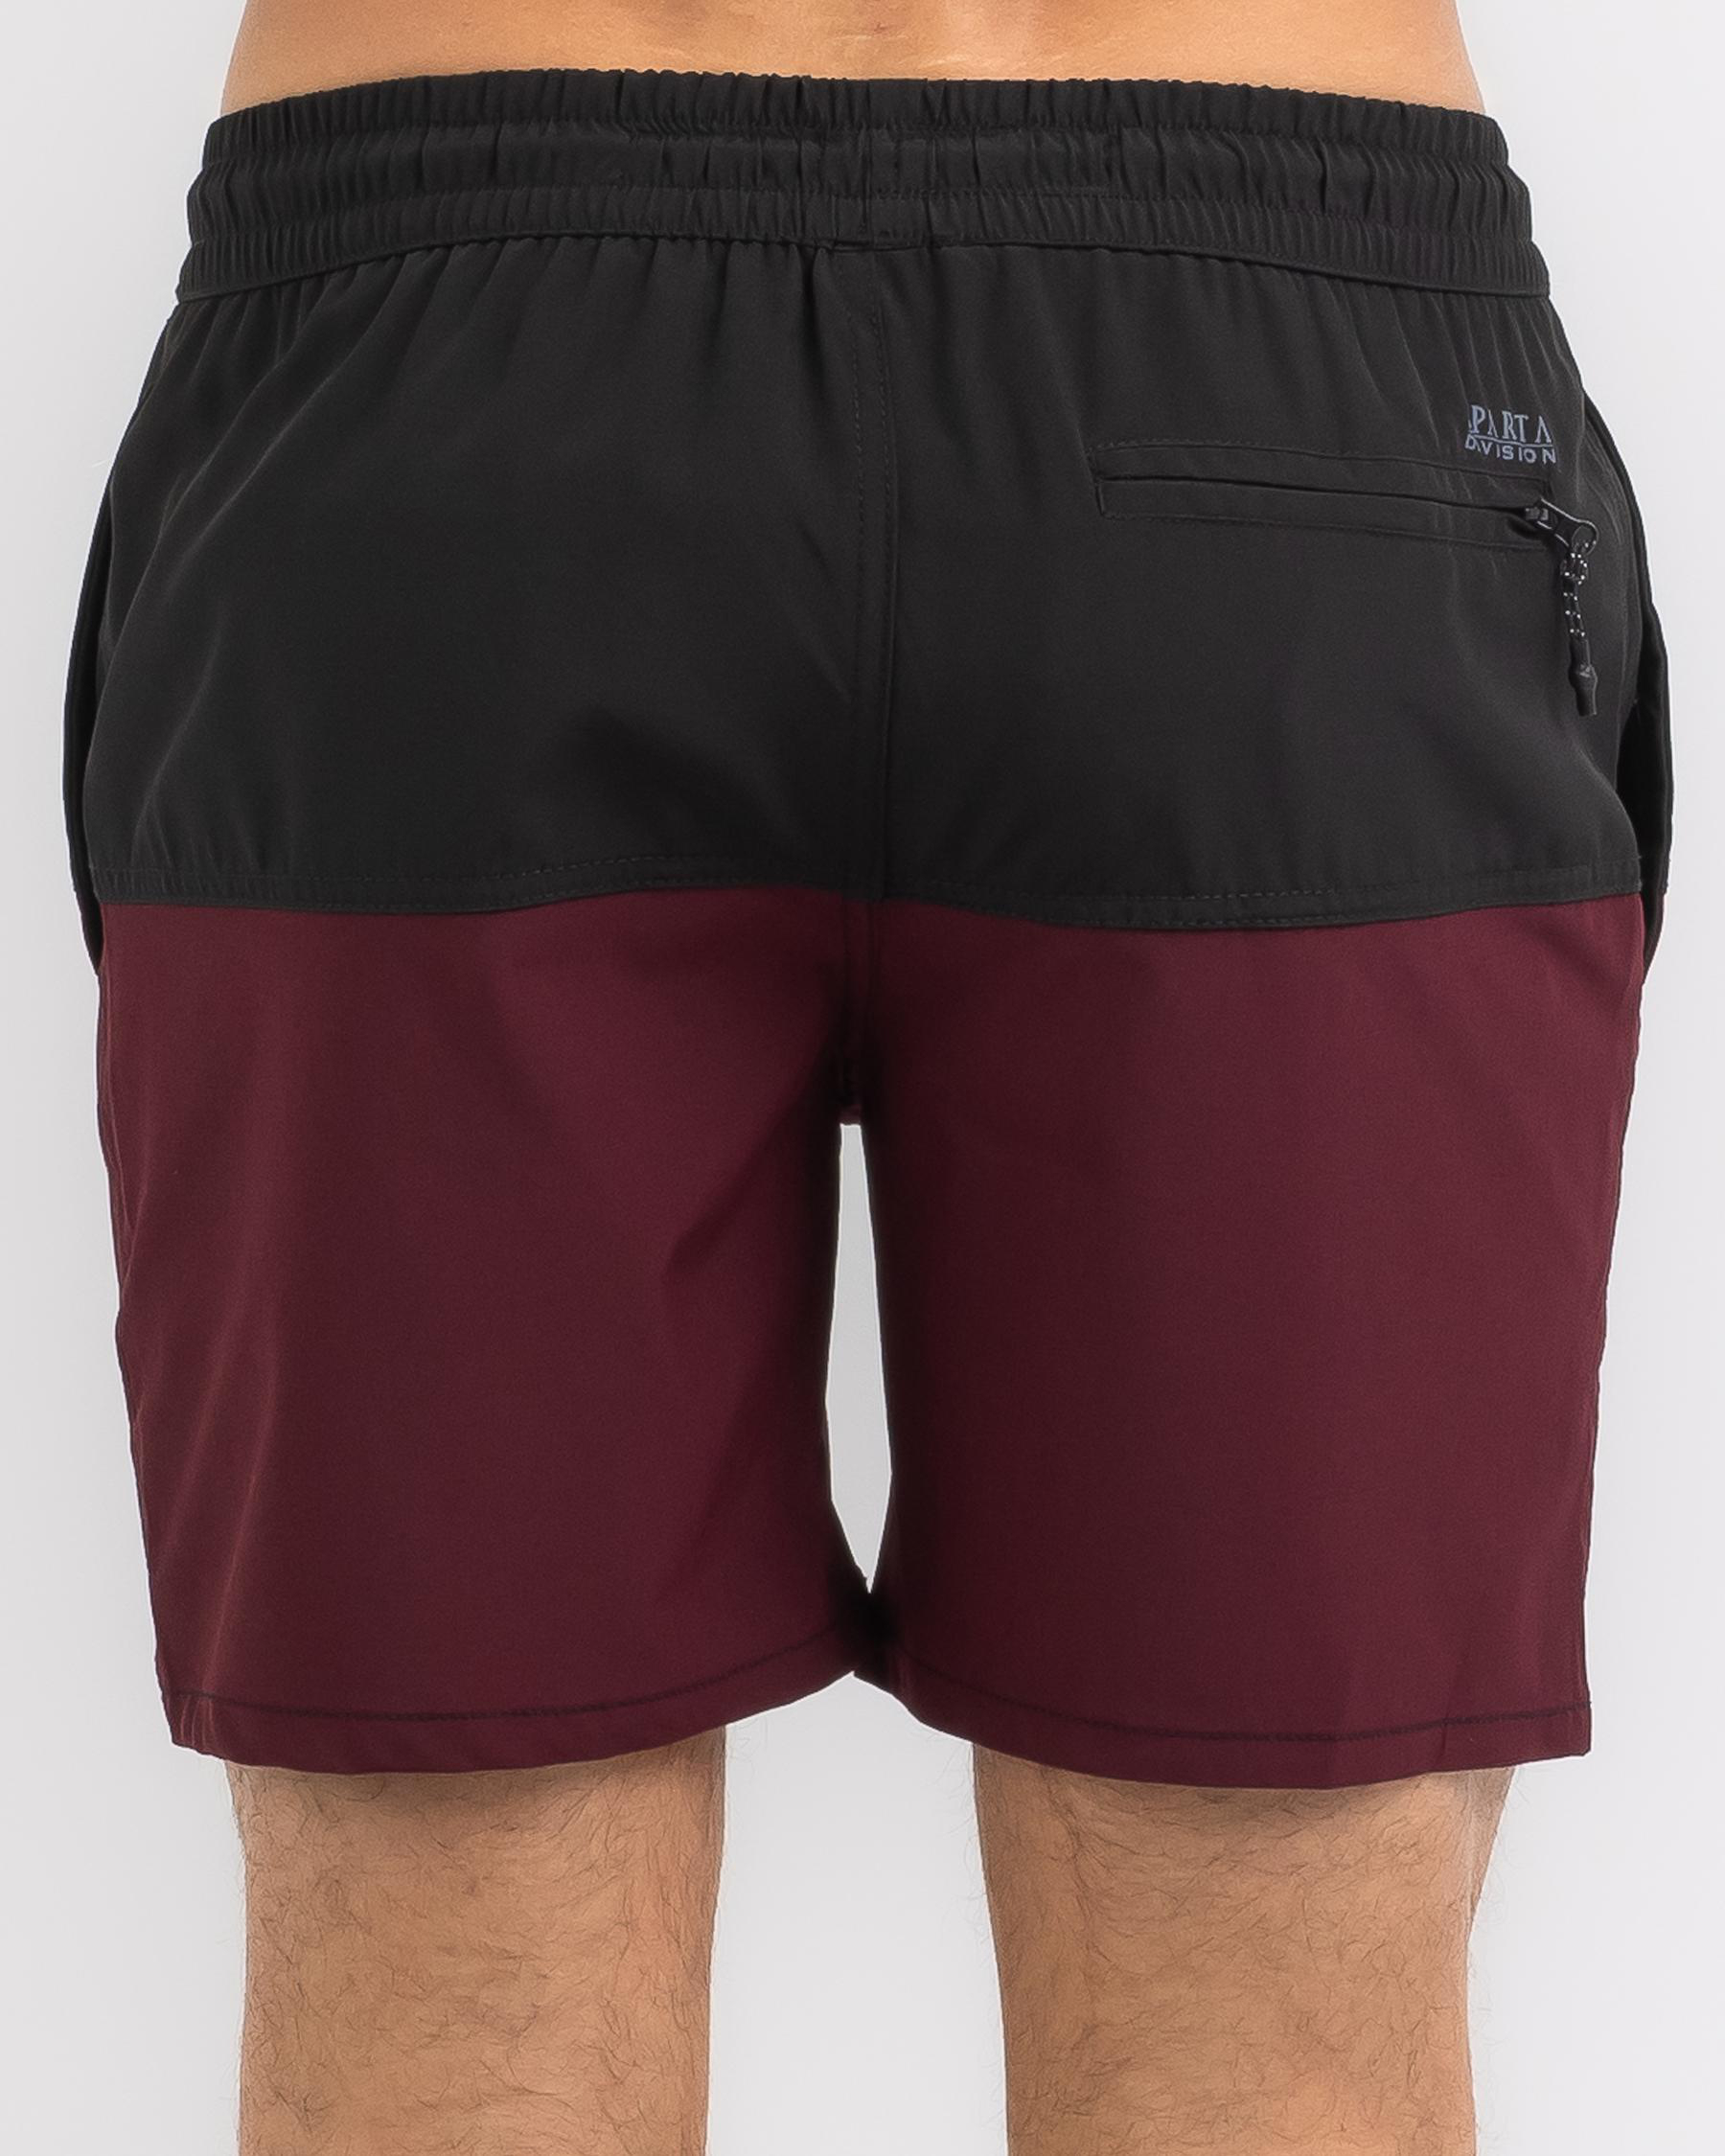 Sparta Traction Mully Shorts In Black/ Port - Fast Shipping & Easy ...